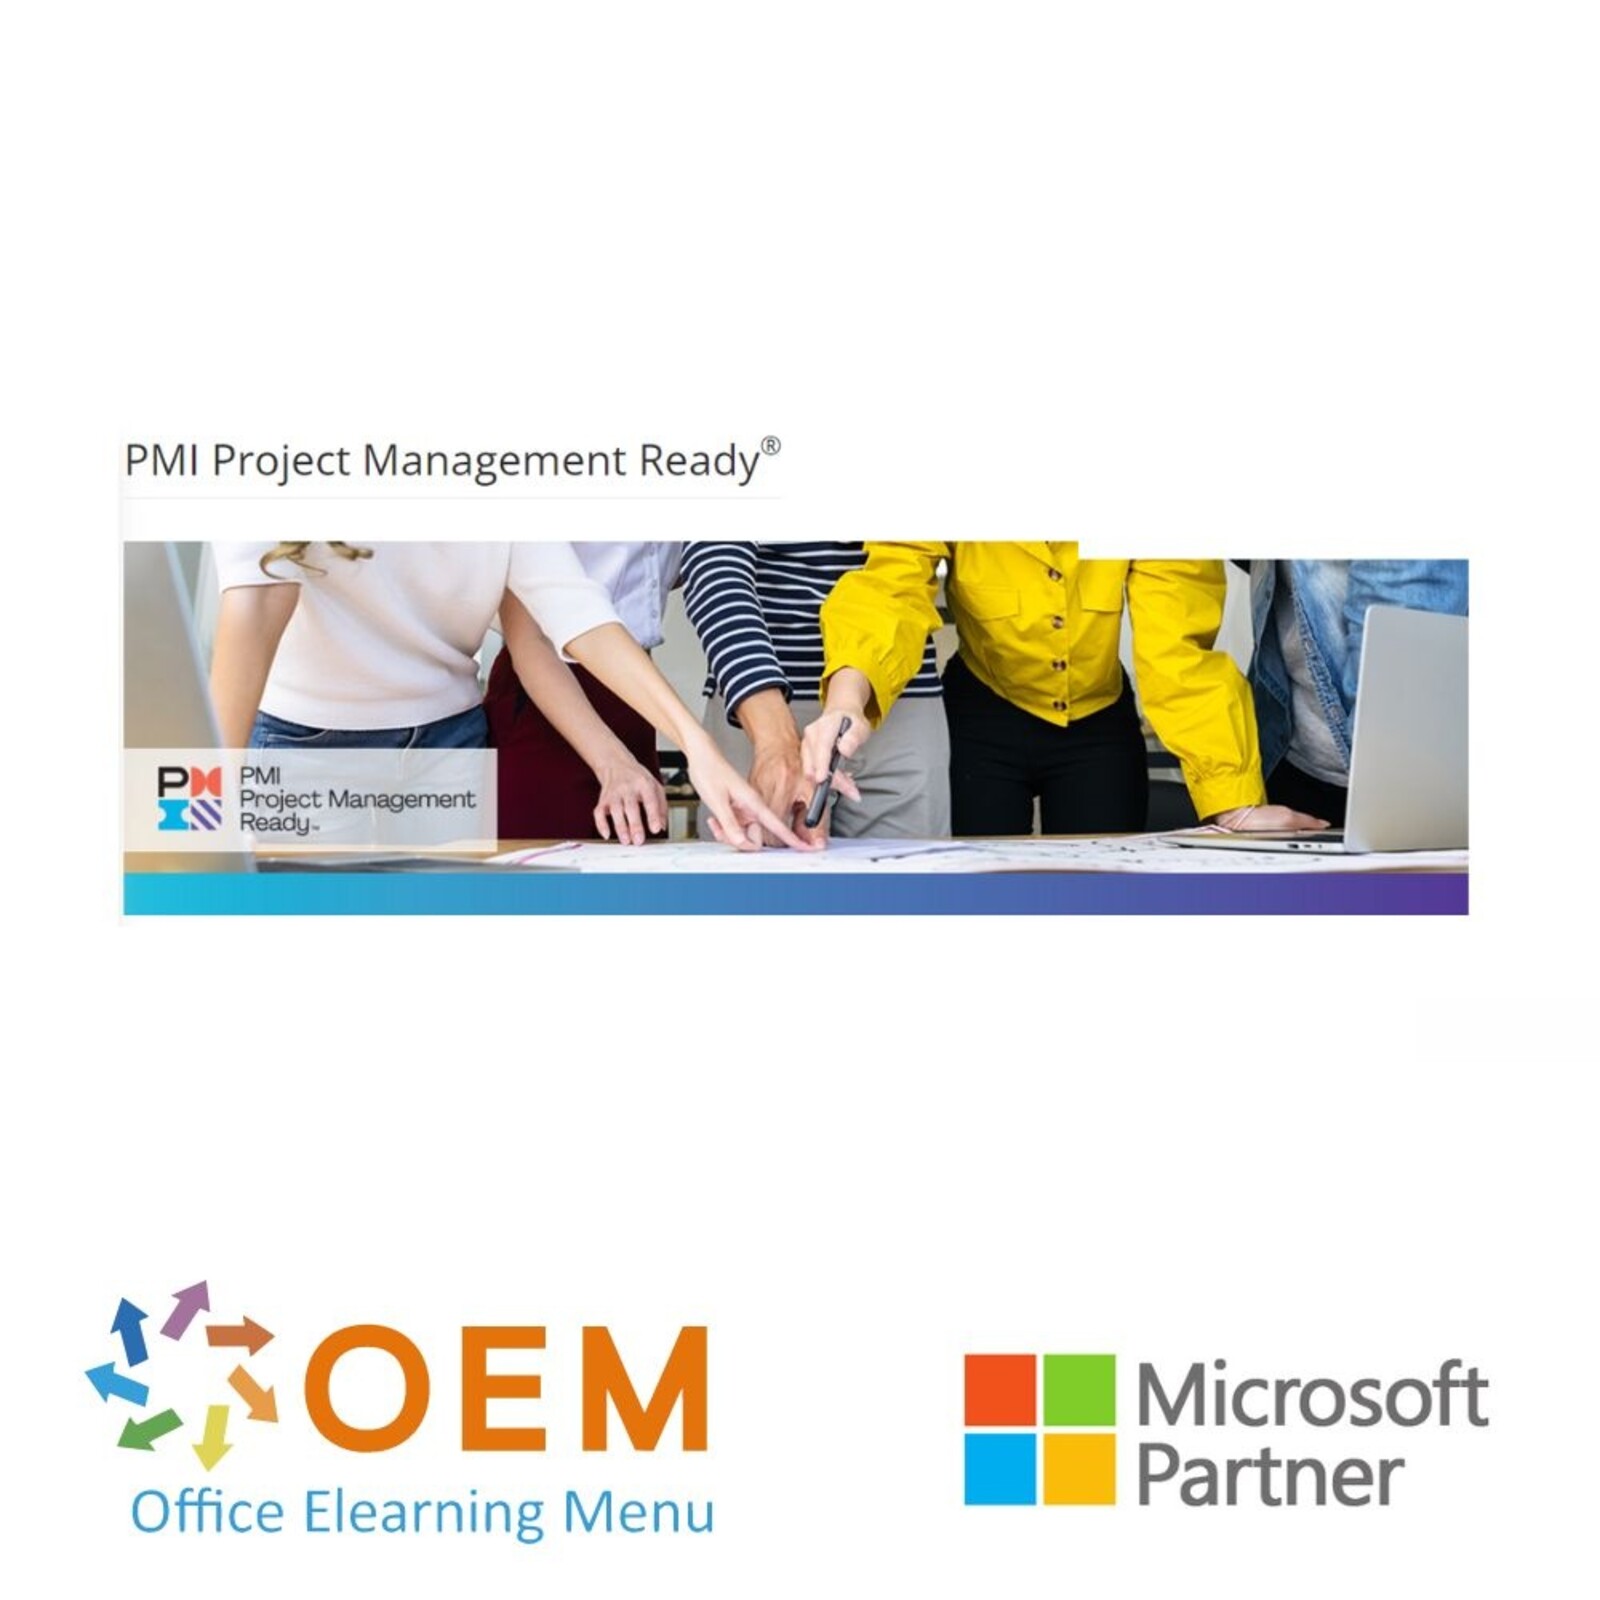 Certiport - Pearson Vue Examen PMI Project Management Ready™ Certification